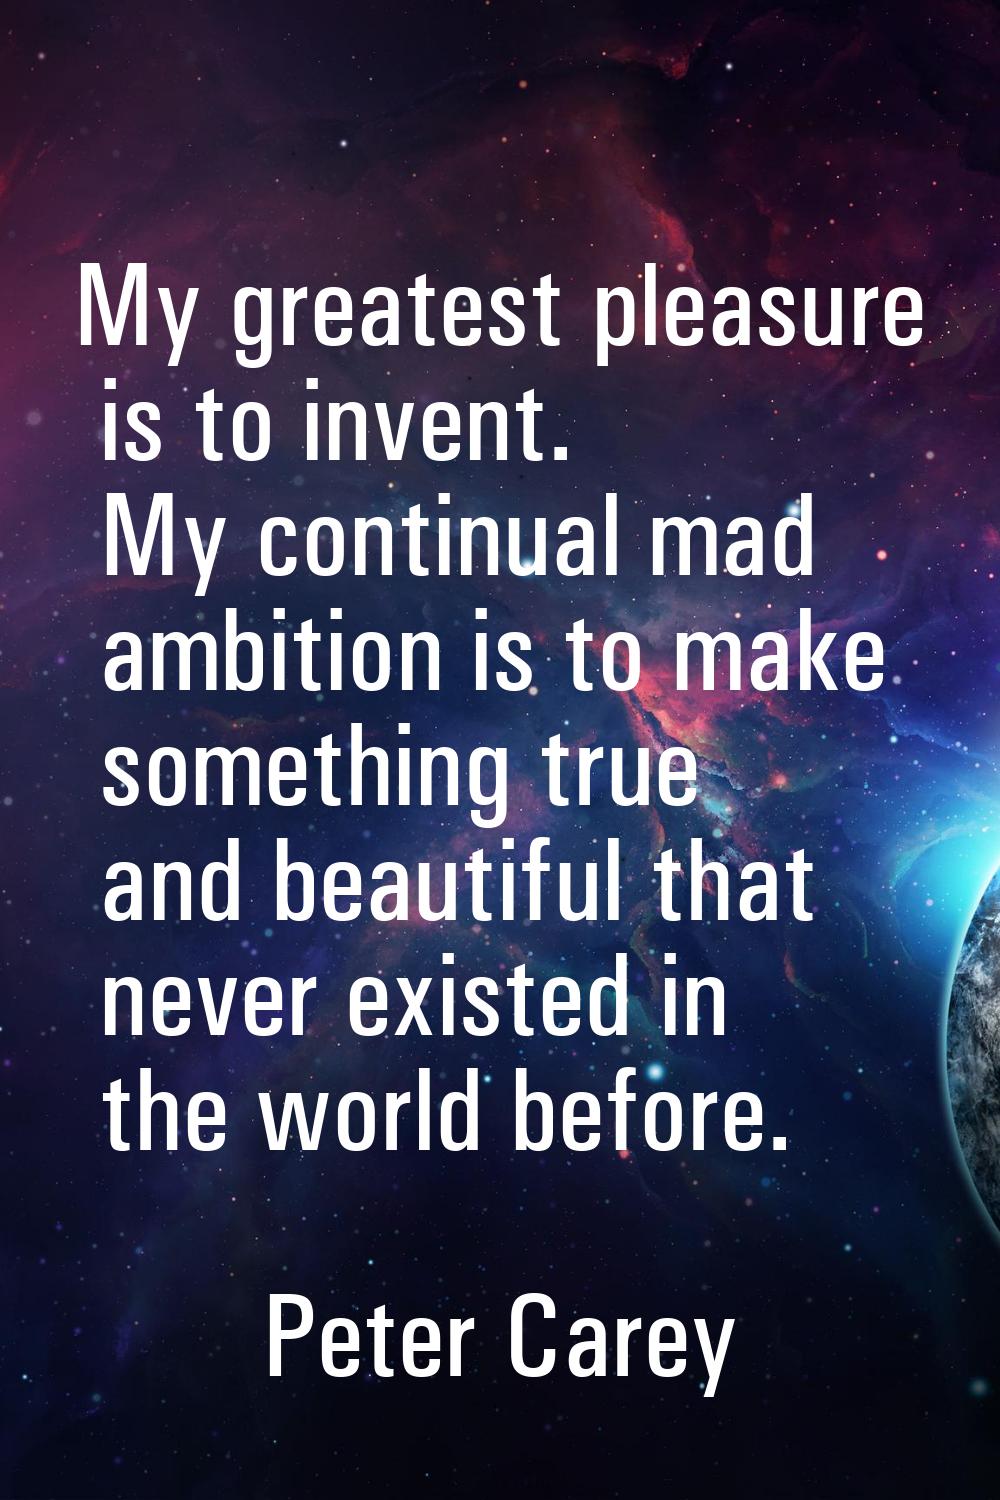 My greatest pleasure is to invent. My continual mad ambition is to make something true and beautifu